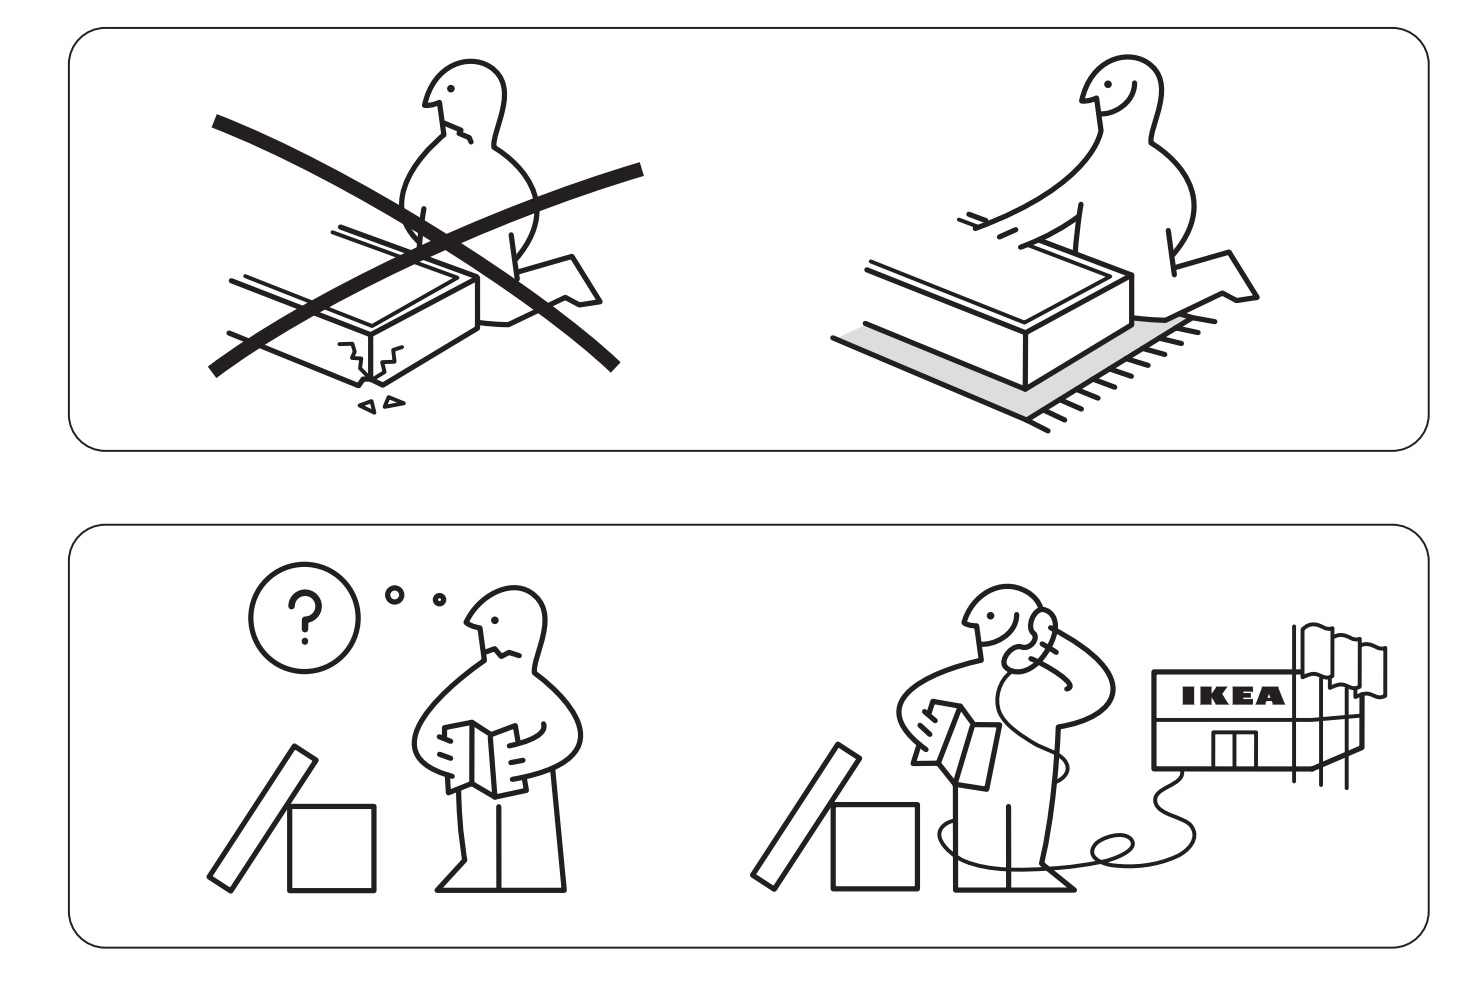 Things I Learned From Assembling Ikea Furniture The Odd Apple